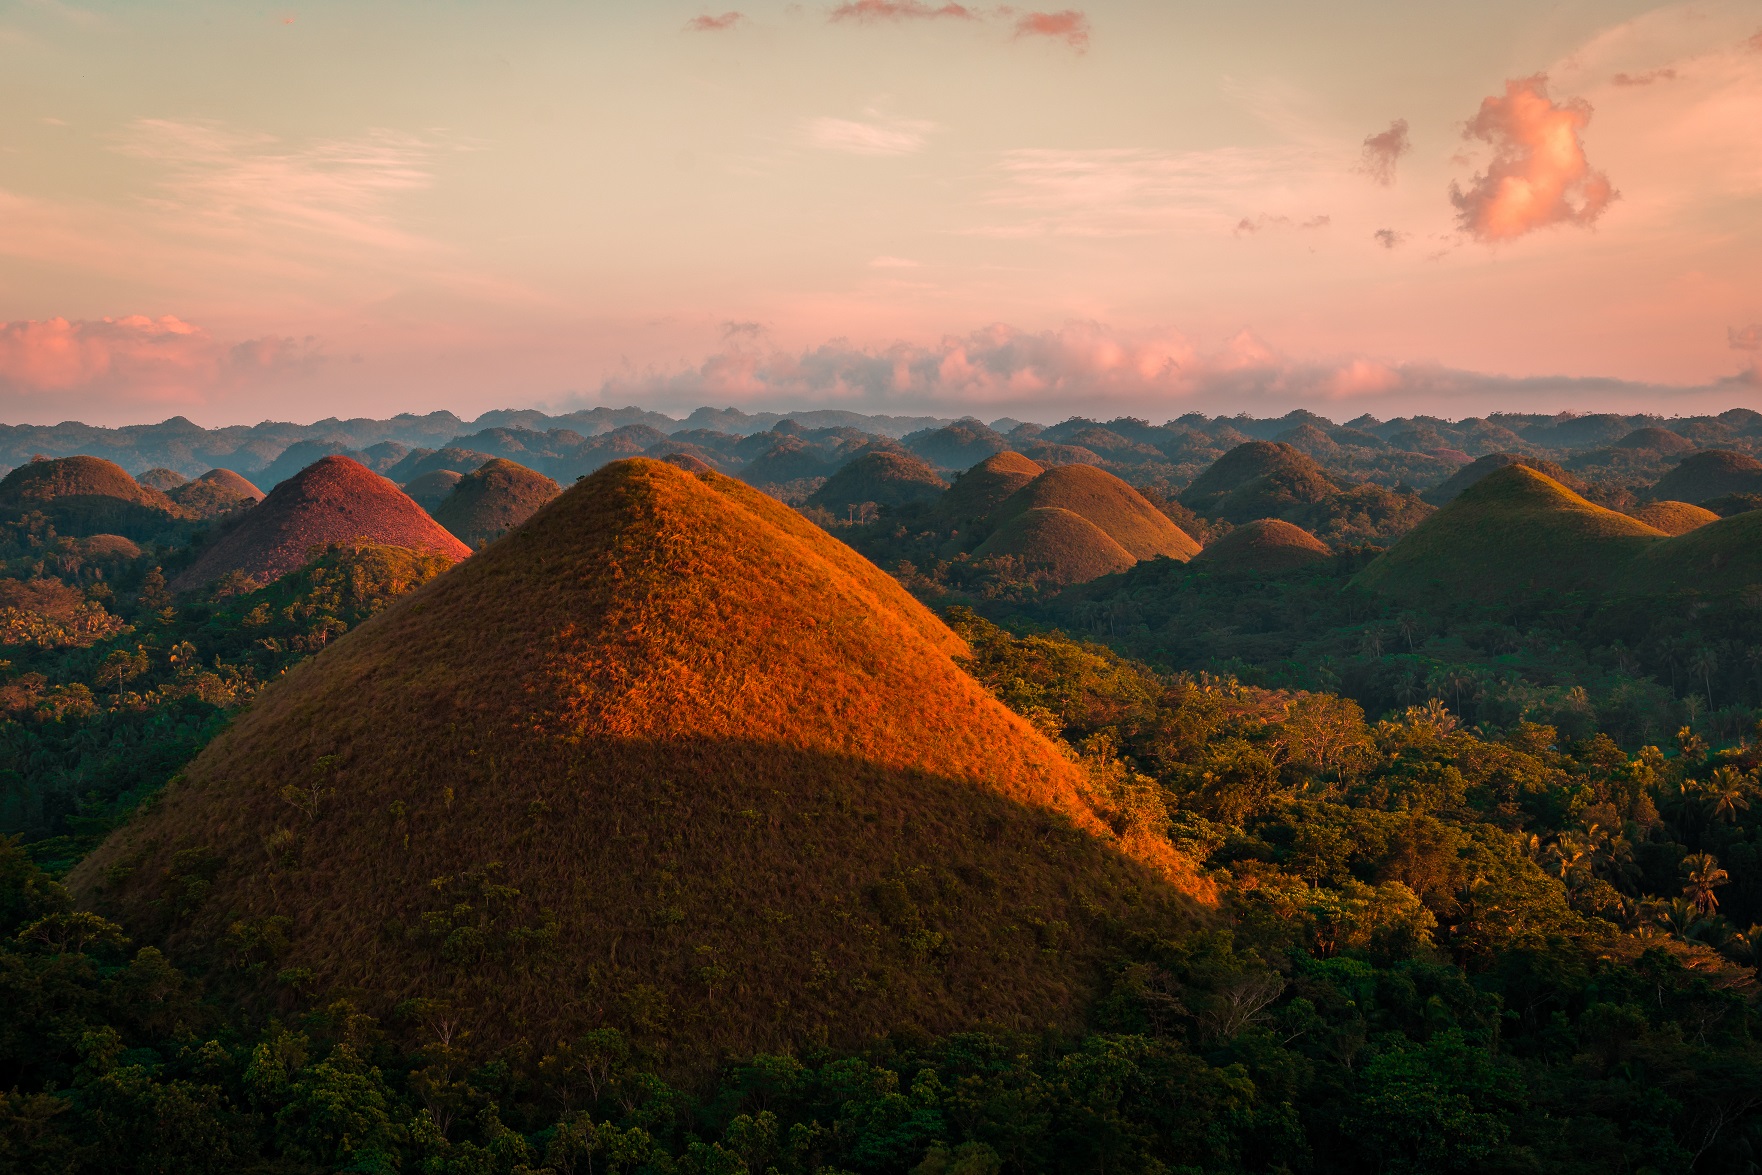 <p>The hills got their name from their appearance. In the dry season, the grass on the hills turns brown, making them look like gigantic chocolate truffles.</p>